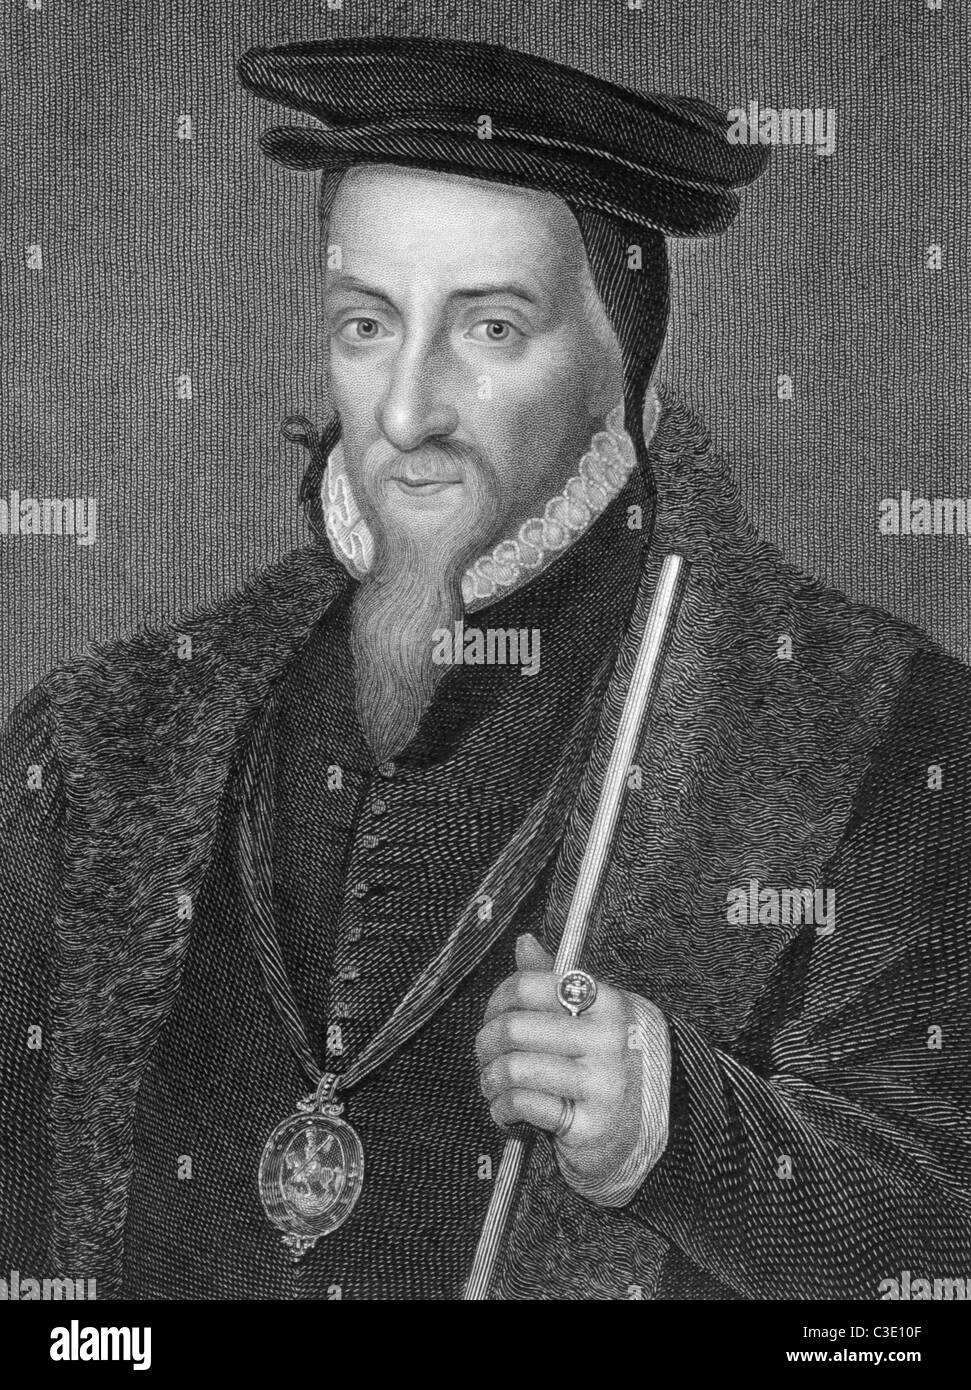 Sir William Paulet (1483/1485-1572) on engraving from 1838. English Secretary of State and statesman. Stock Photo